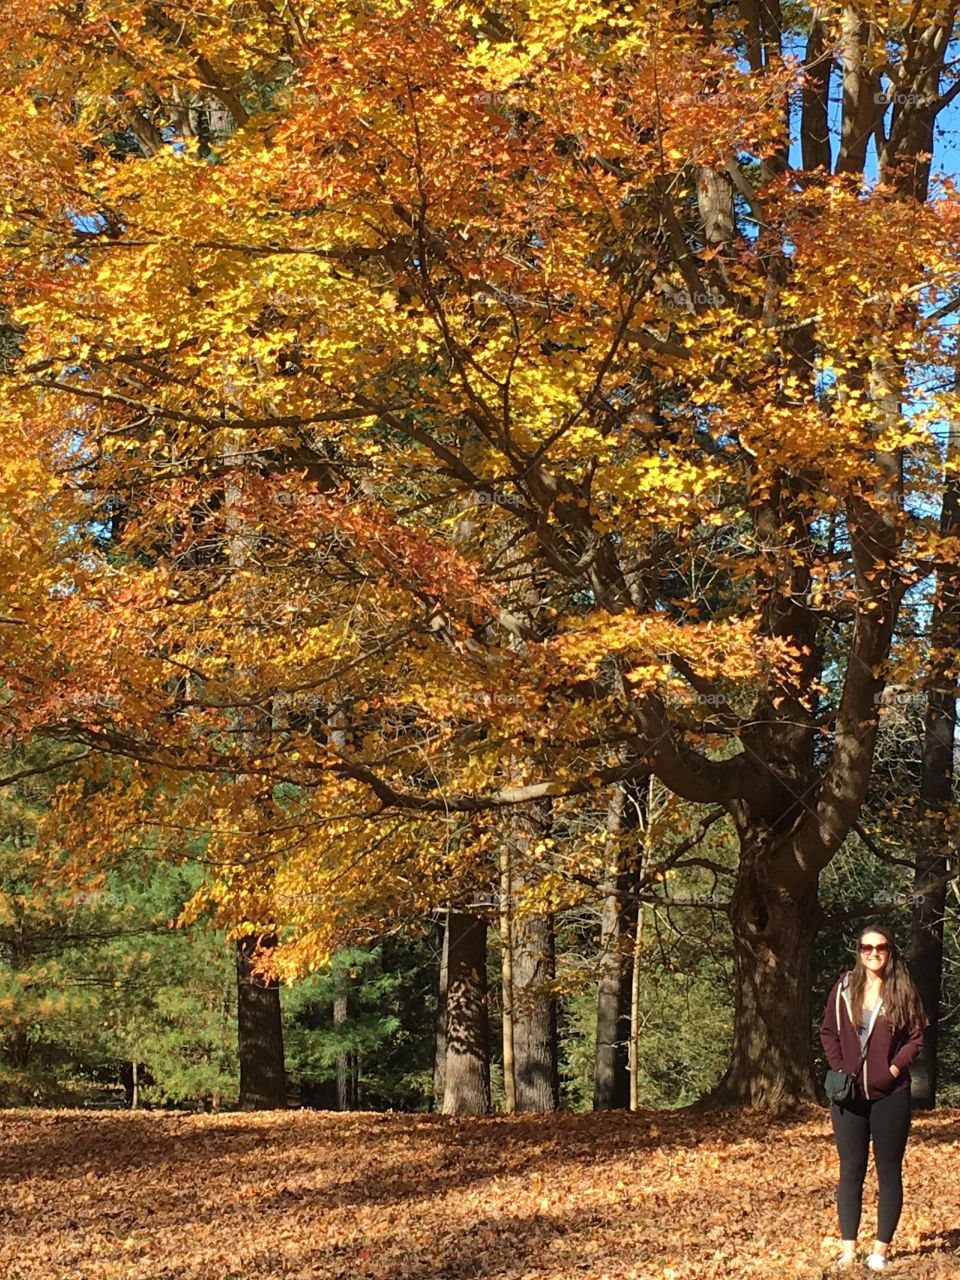 Some beautiful trees on the Biltmore Estate, the colors are phenomenal! 